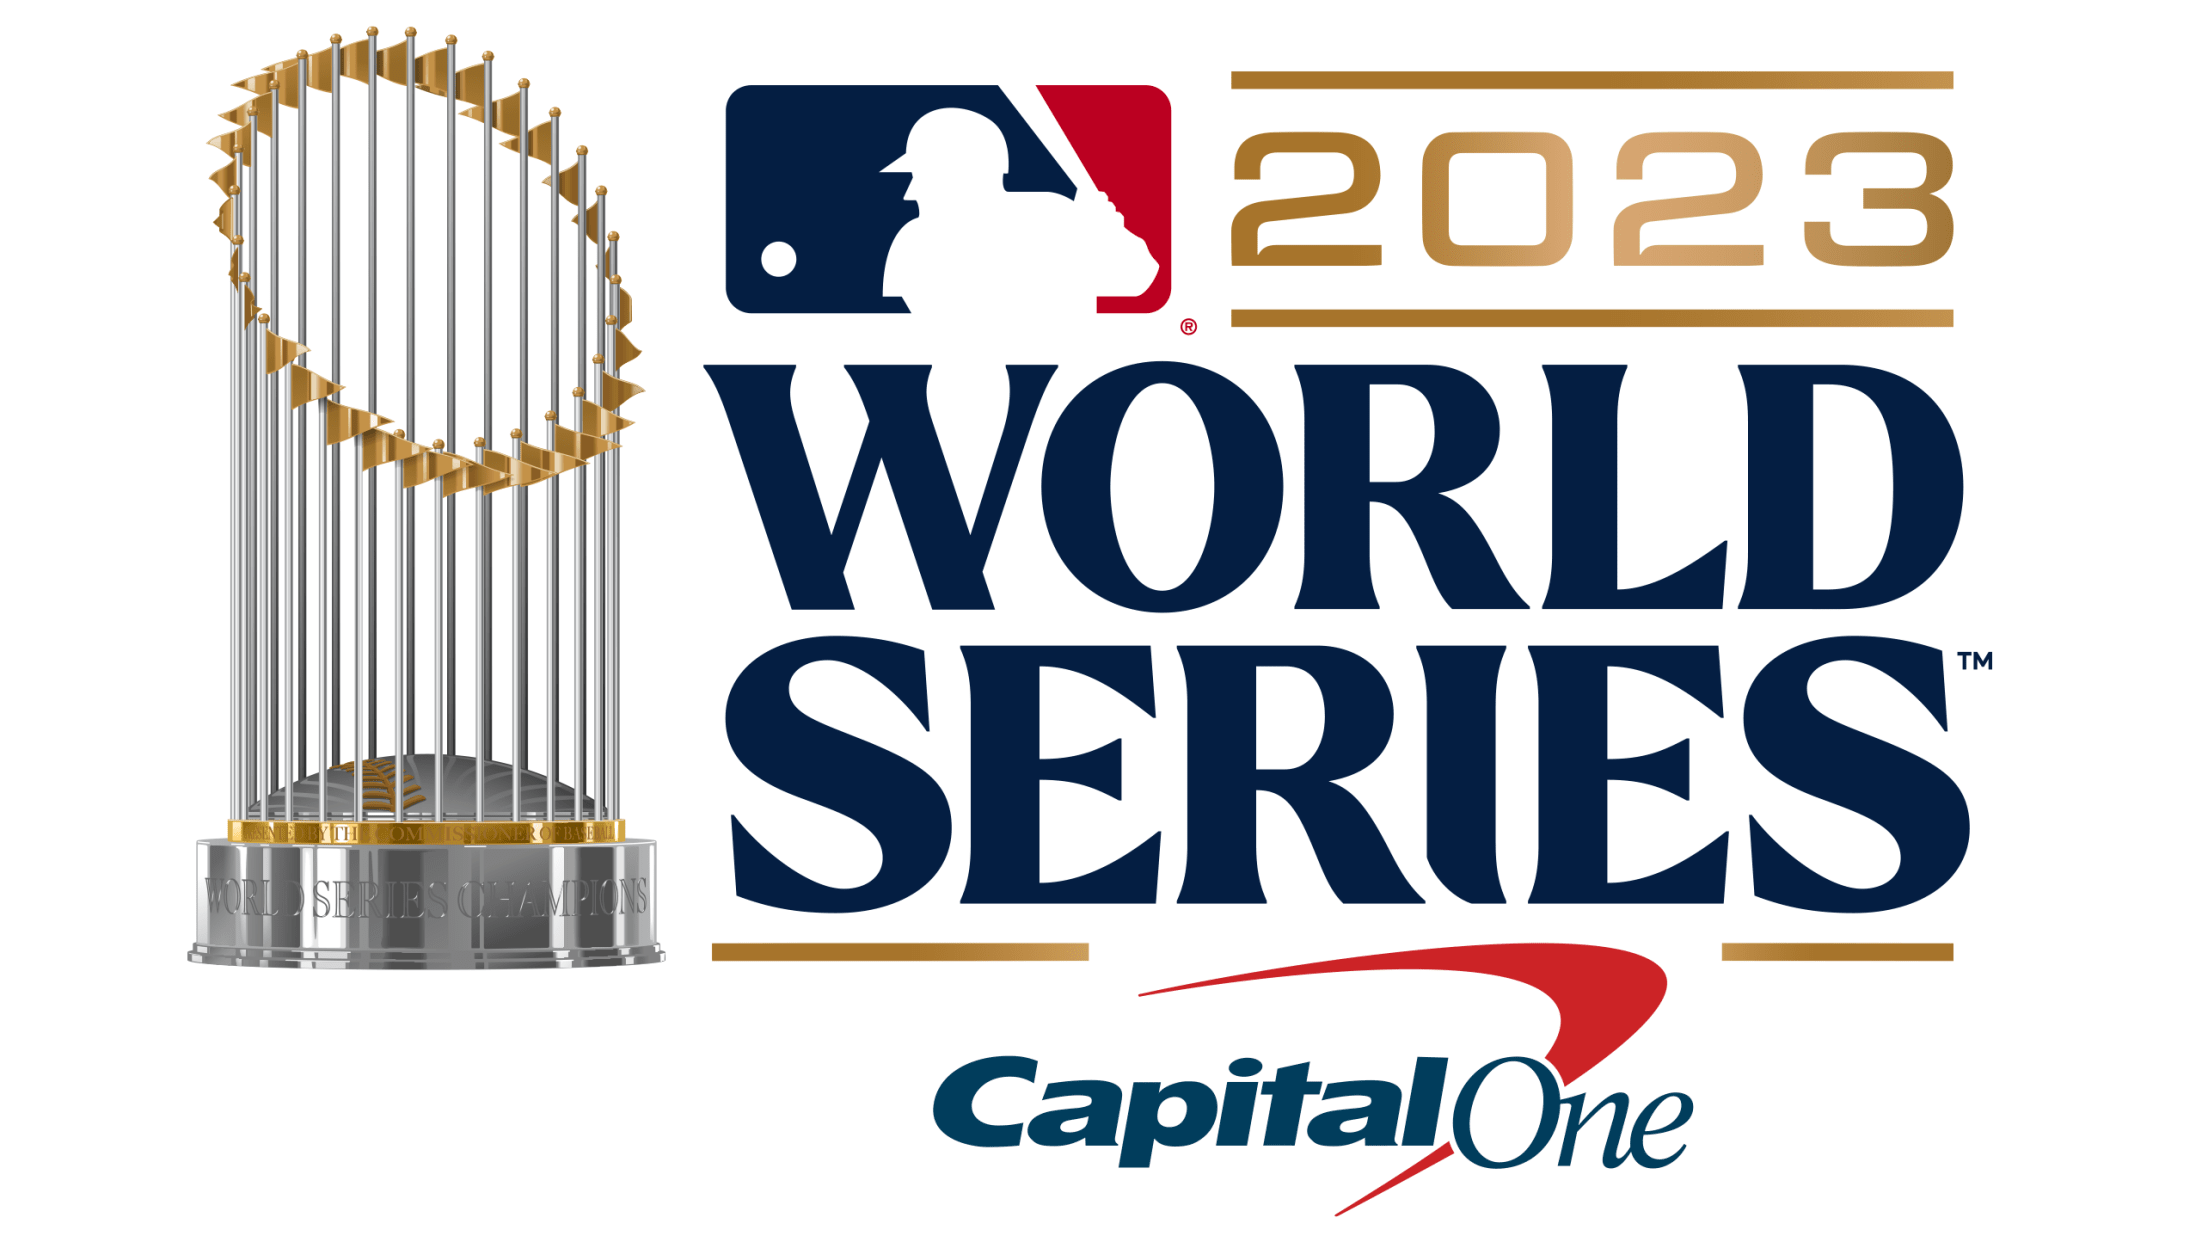 TBS to Be Exclusive Home of 2022 ALCS presented by loanDepot